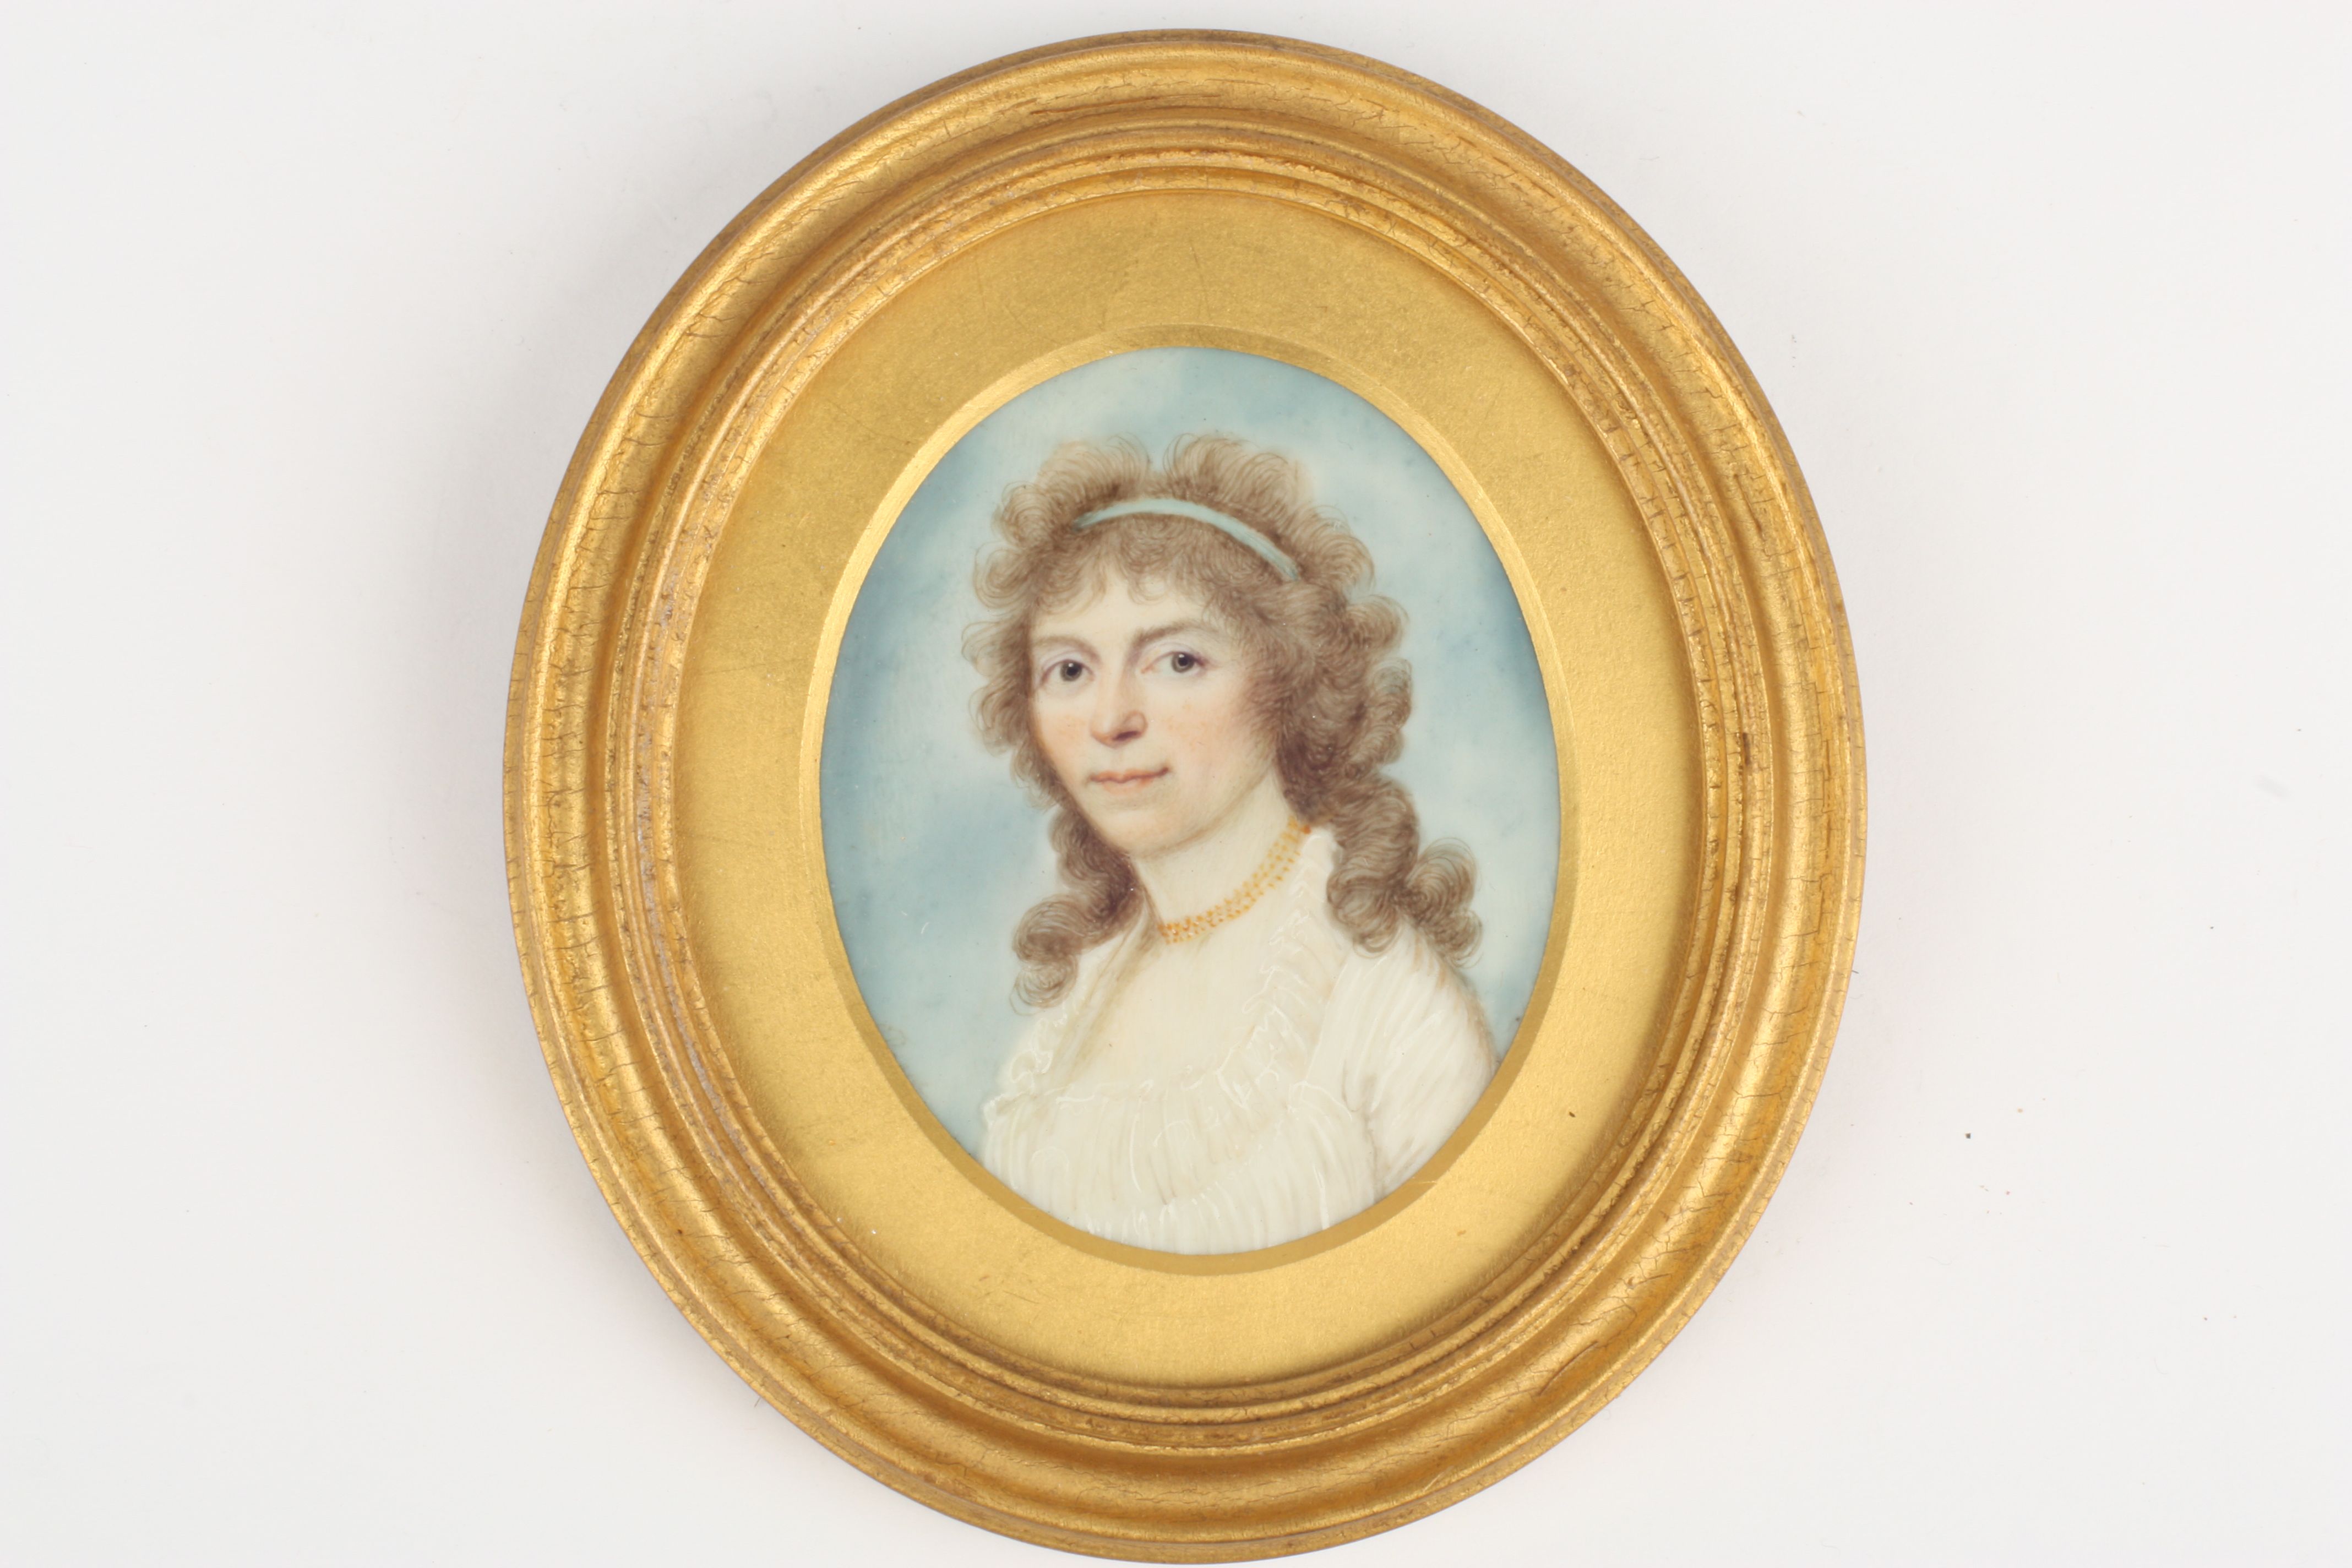 An early 19th century miniature portrait of a lady, painted on ivory, the sitter with flowing